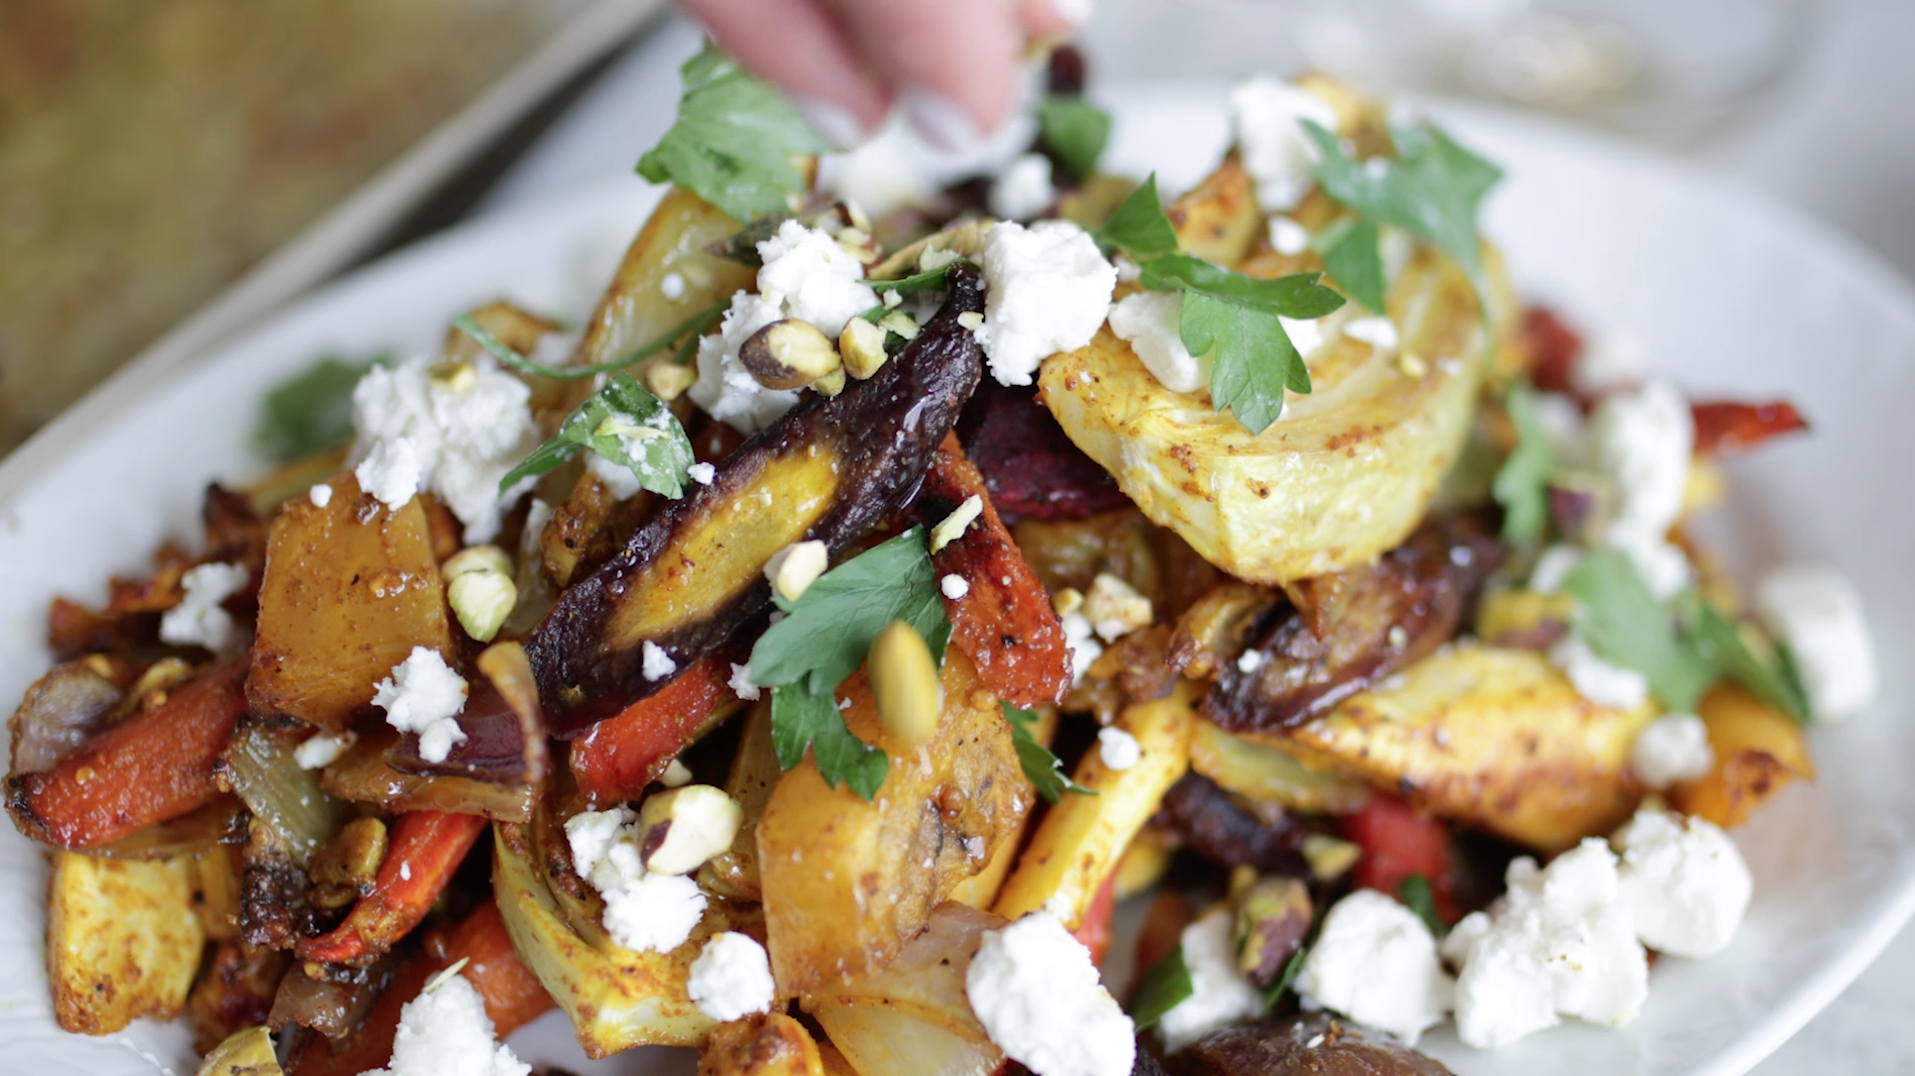 Curry Spiced Root Vegetables with Feta and Pistachios